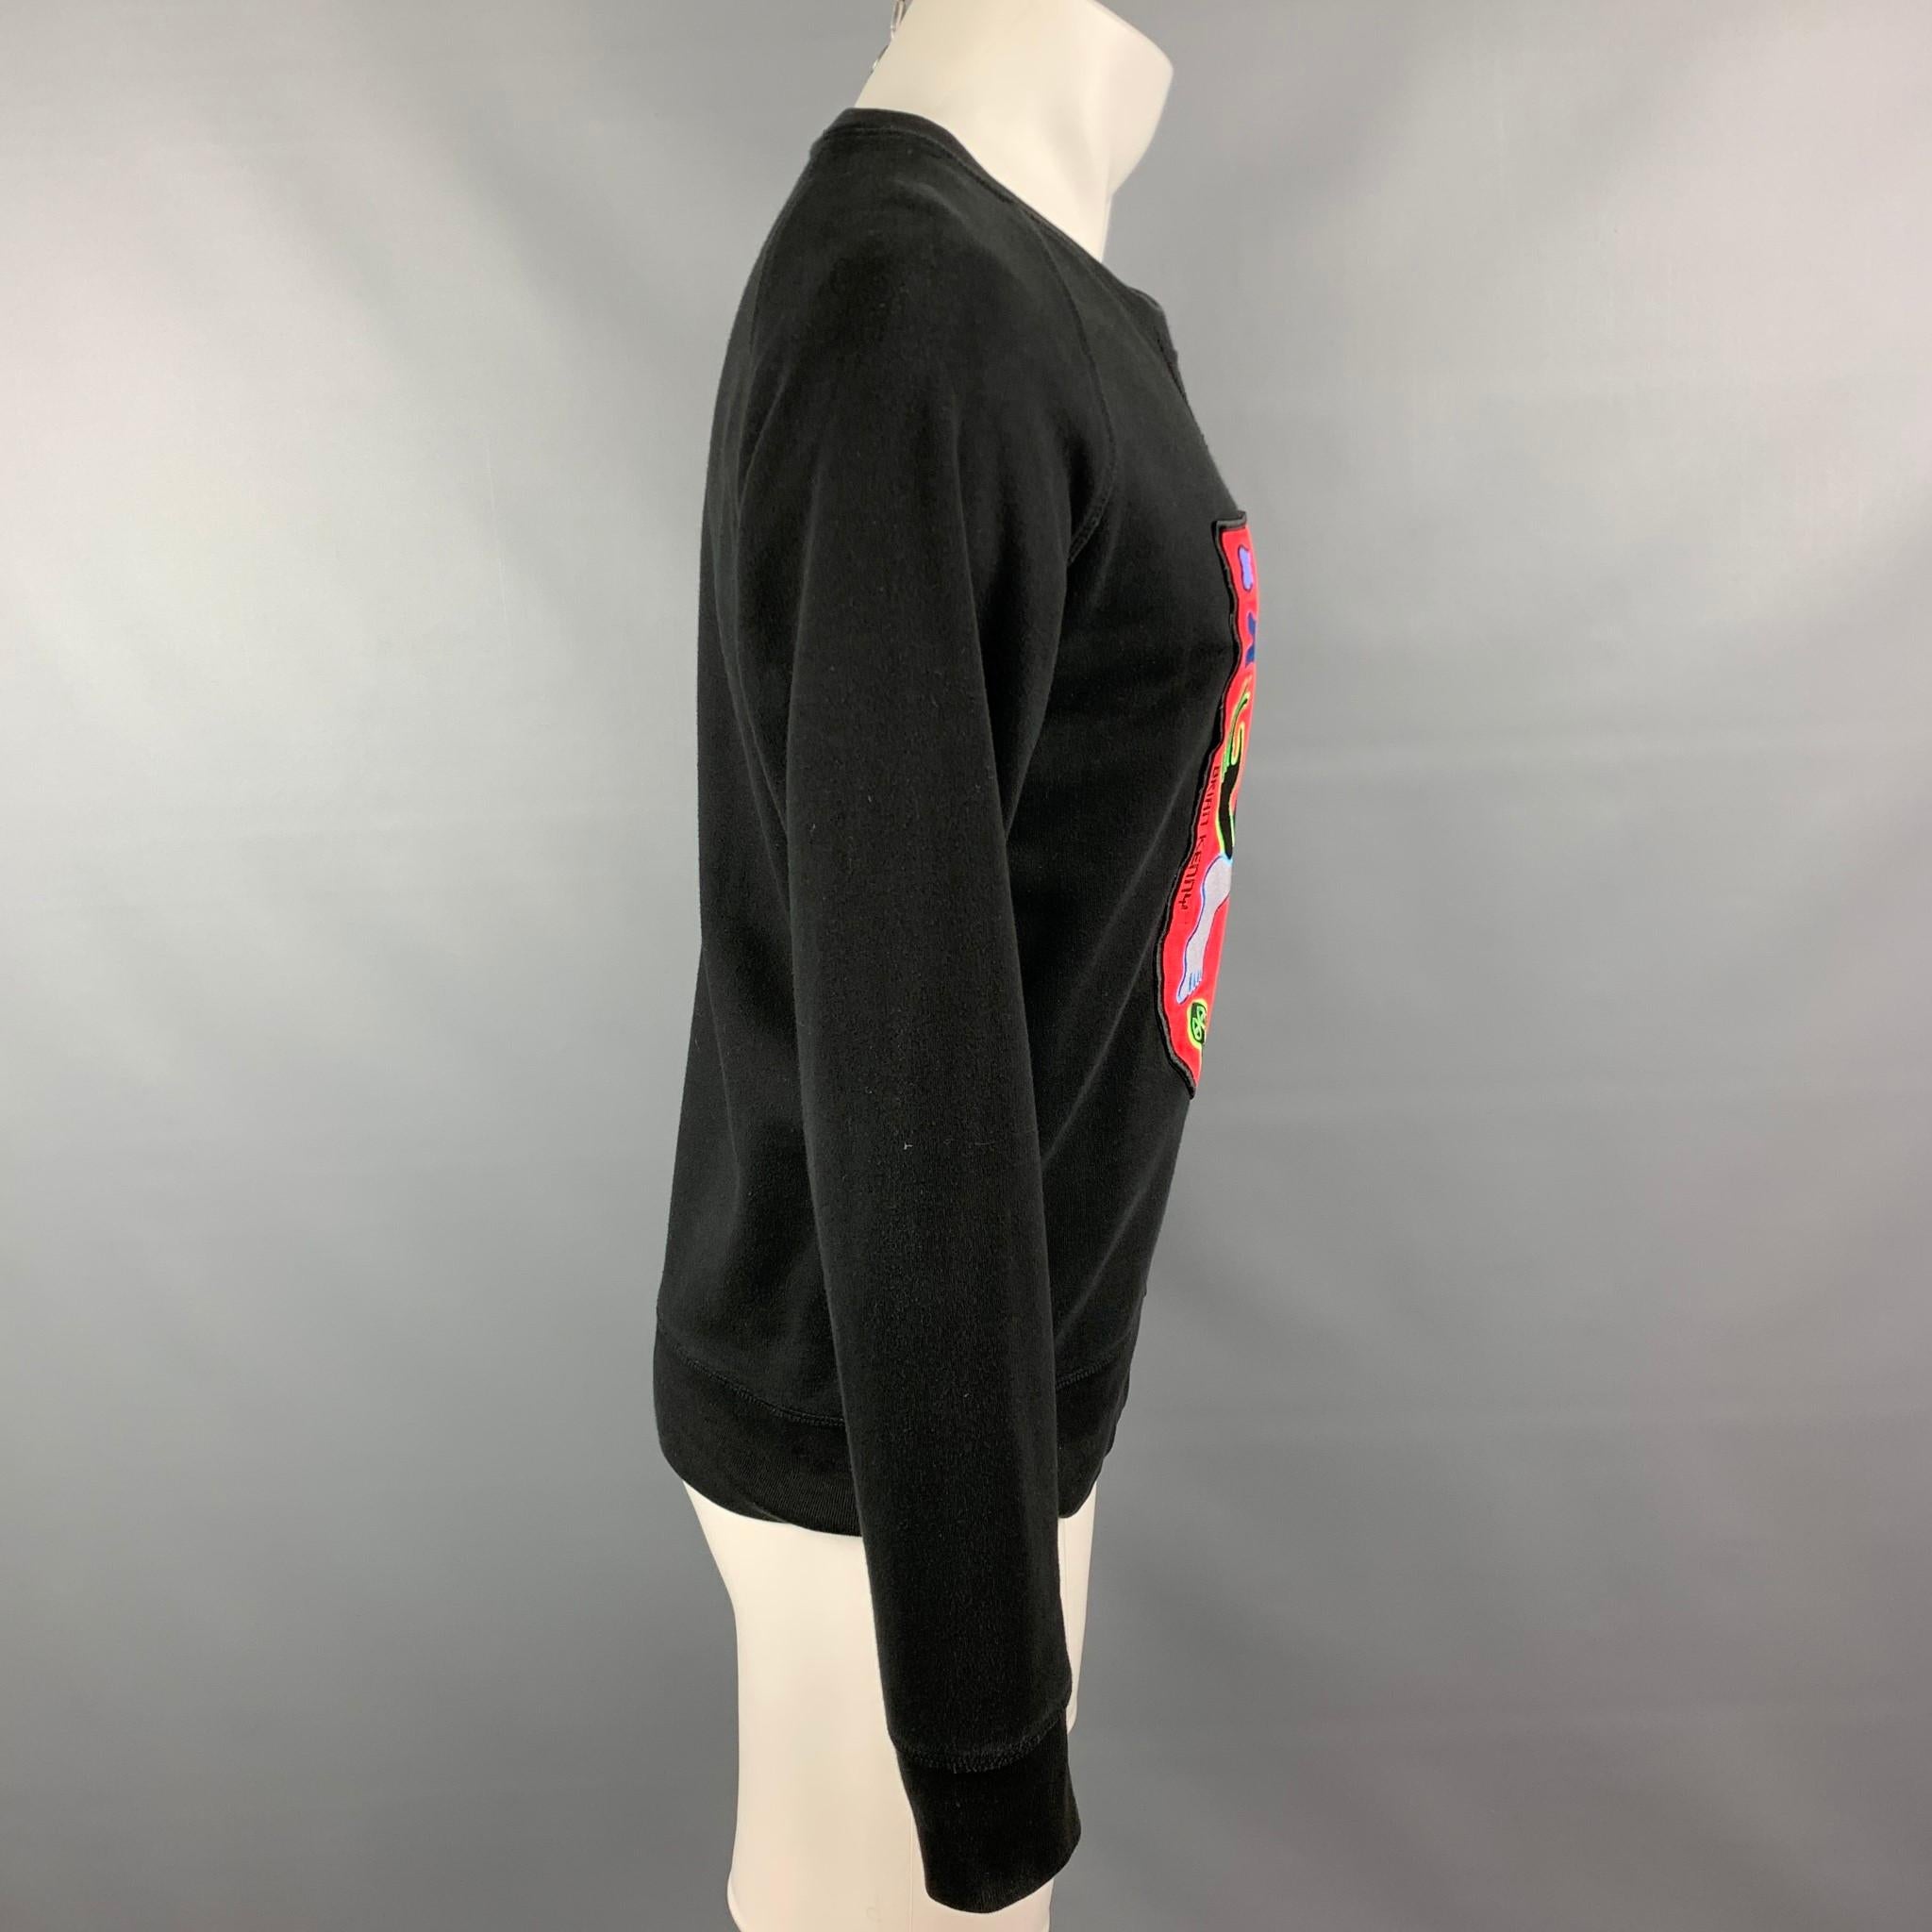 CHRISTIAN LACROIX x BRIAN KENNY Limited Edition sweatshirt comes in a black & red abstract cotton featuring a large patch detain and a crew-neck.

Good Pre-Owned Condition.
Marked: S

Measurements:

Shoulder: 17 in.
Chest: 41 in.
Sleeve: 26.5